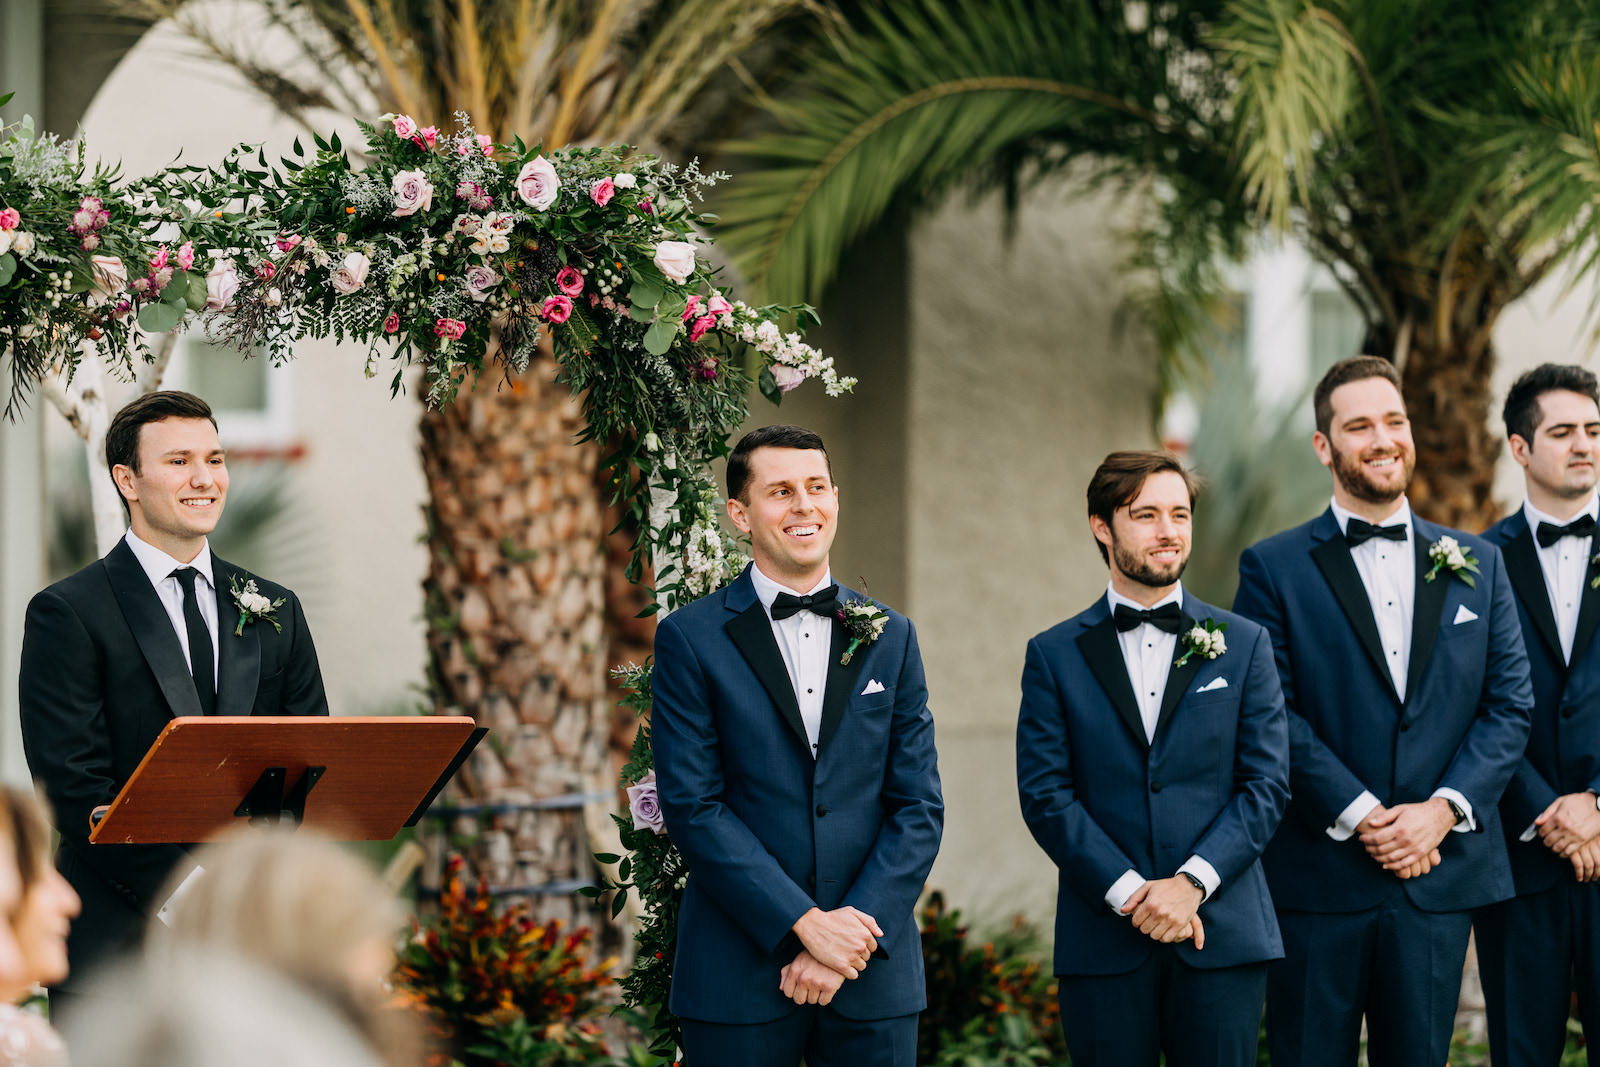 Florida Groom Reaction to Watching Bride Walking Down the Wedding Ceremony Aisle Wearing Midnight Blue Tuxedo | Tampa Bay Wedding Photographer Amber McWhorter Photography | Wedding Florist Leaf It To Us